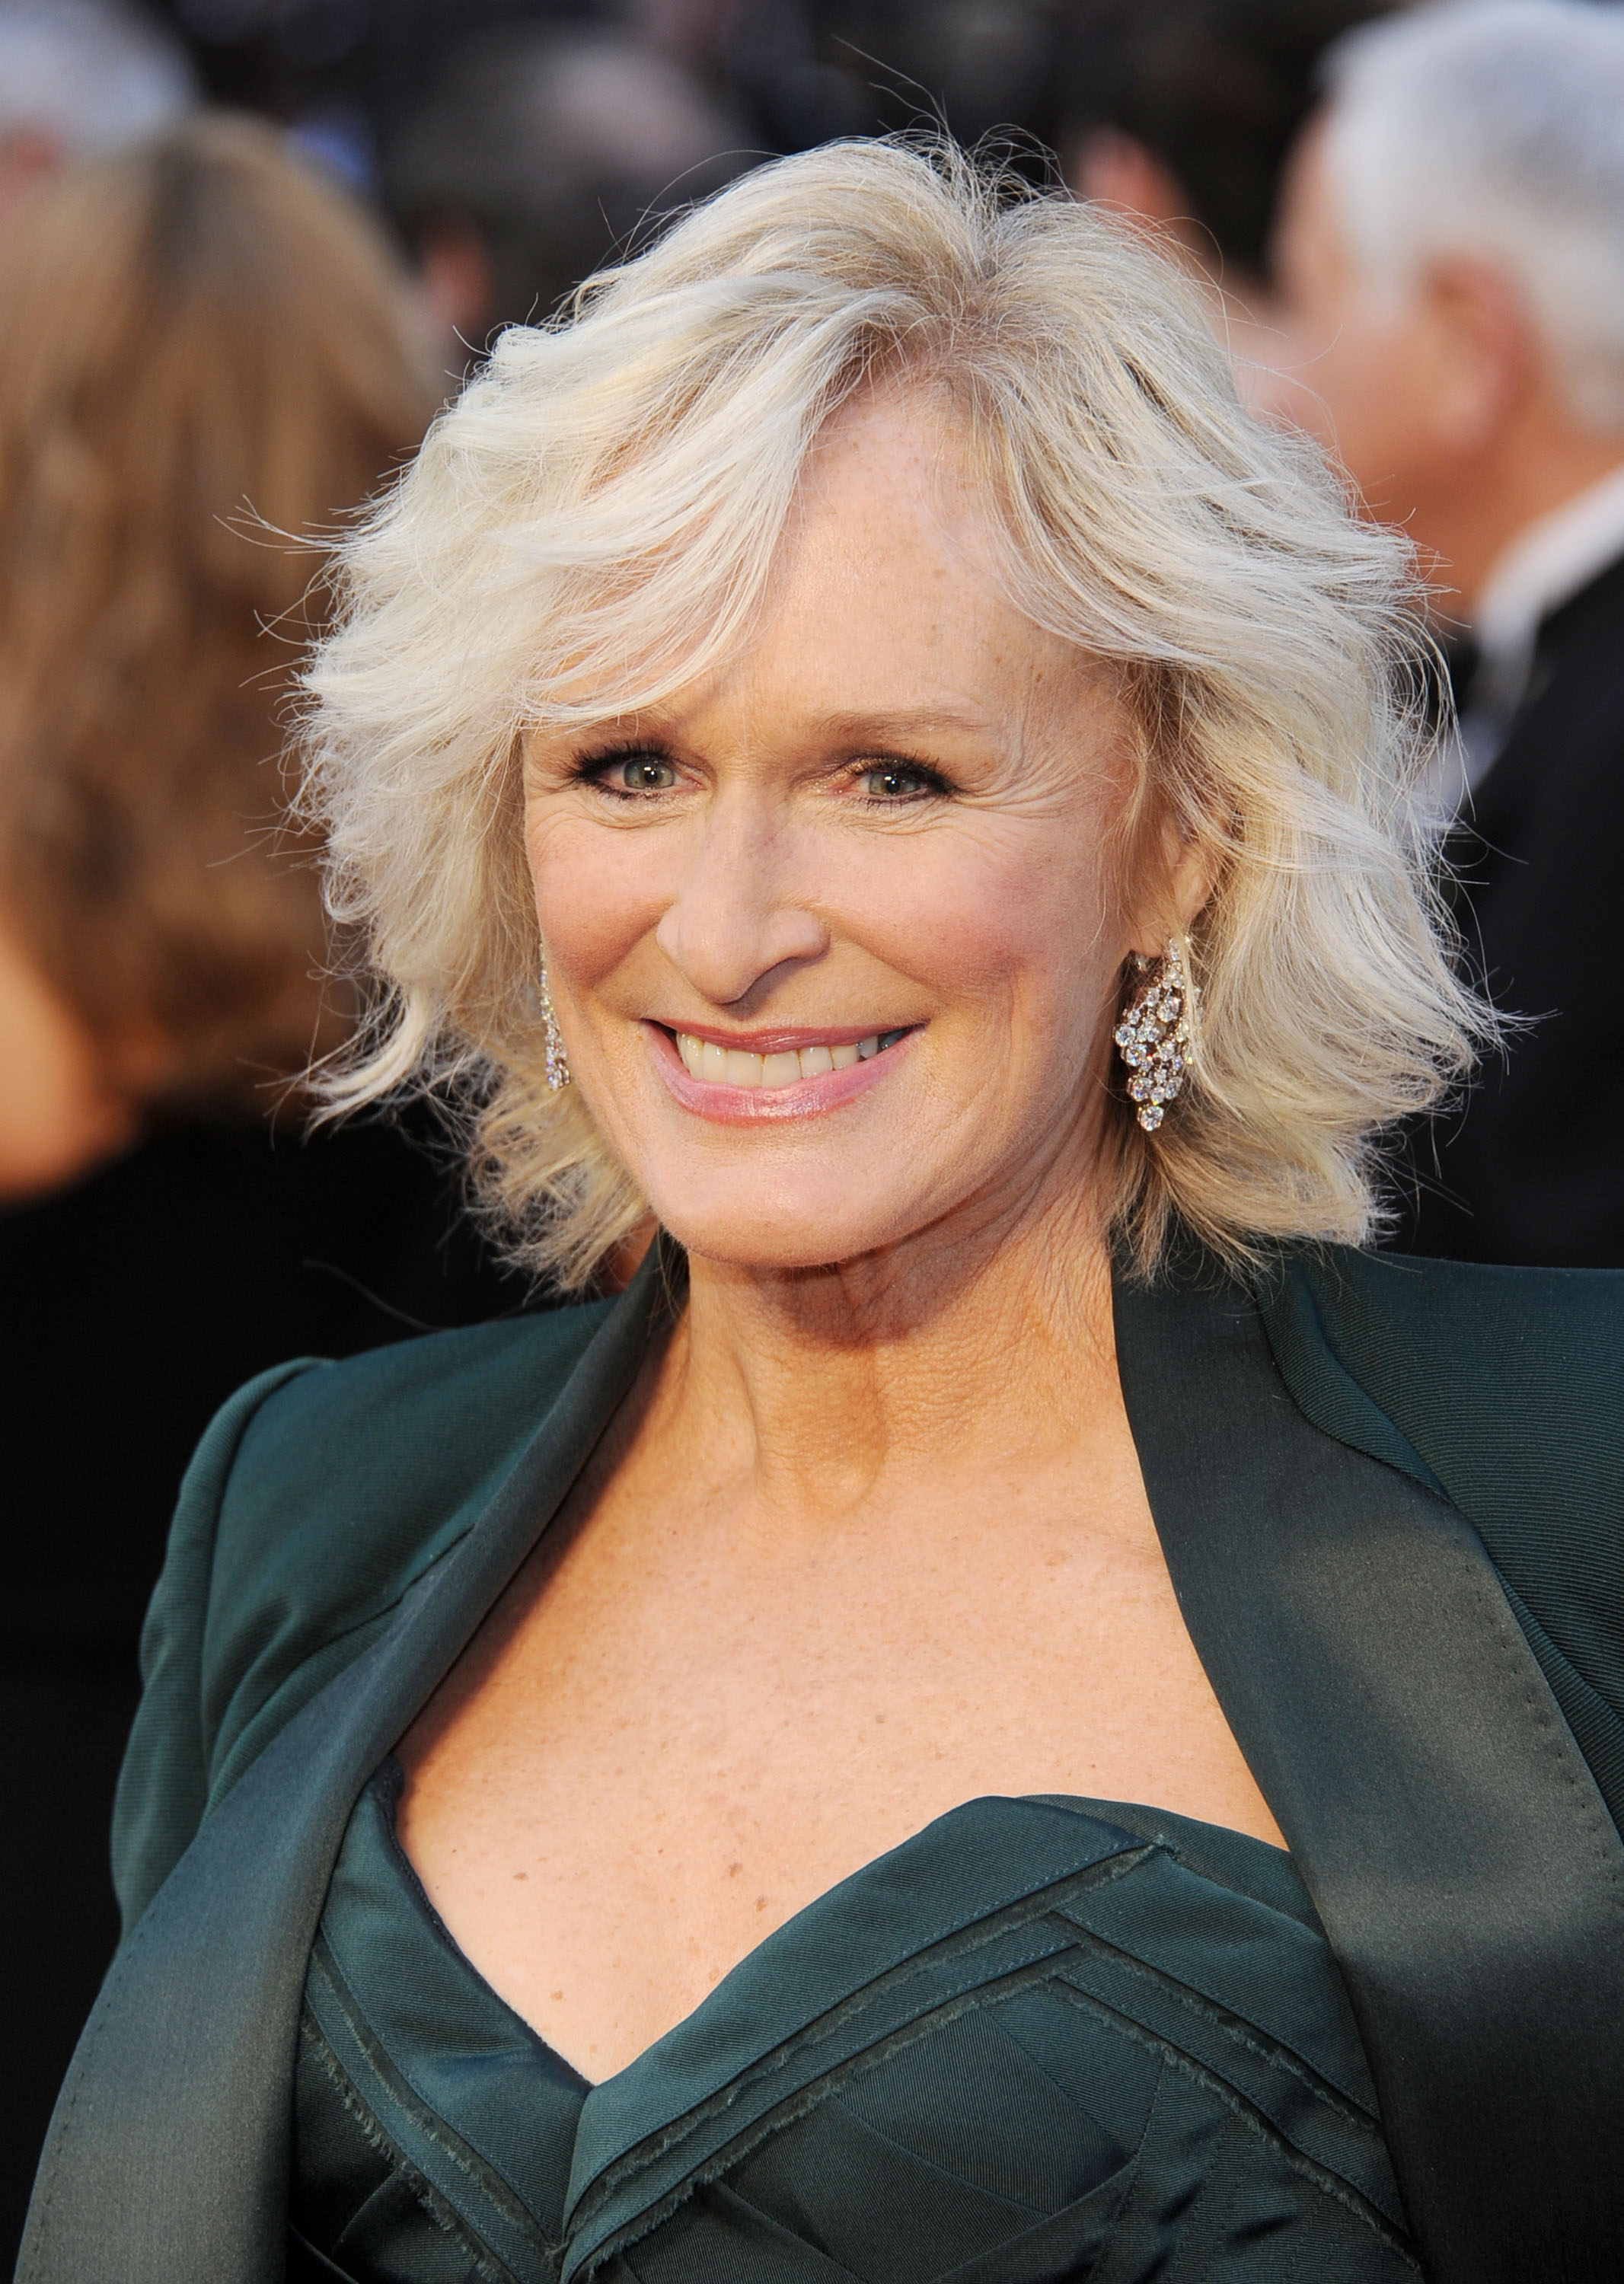 Glenn Close at the 84th Annual Academy Awards on February 26, 2012, in Hollywood, California | Source: Getty Images